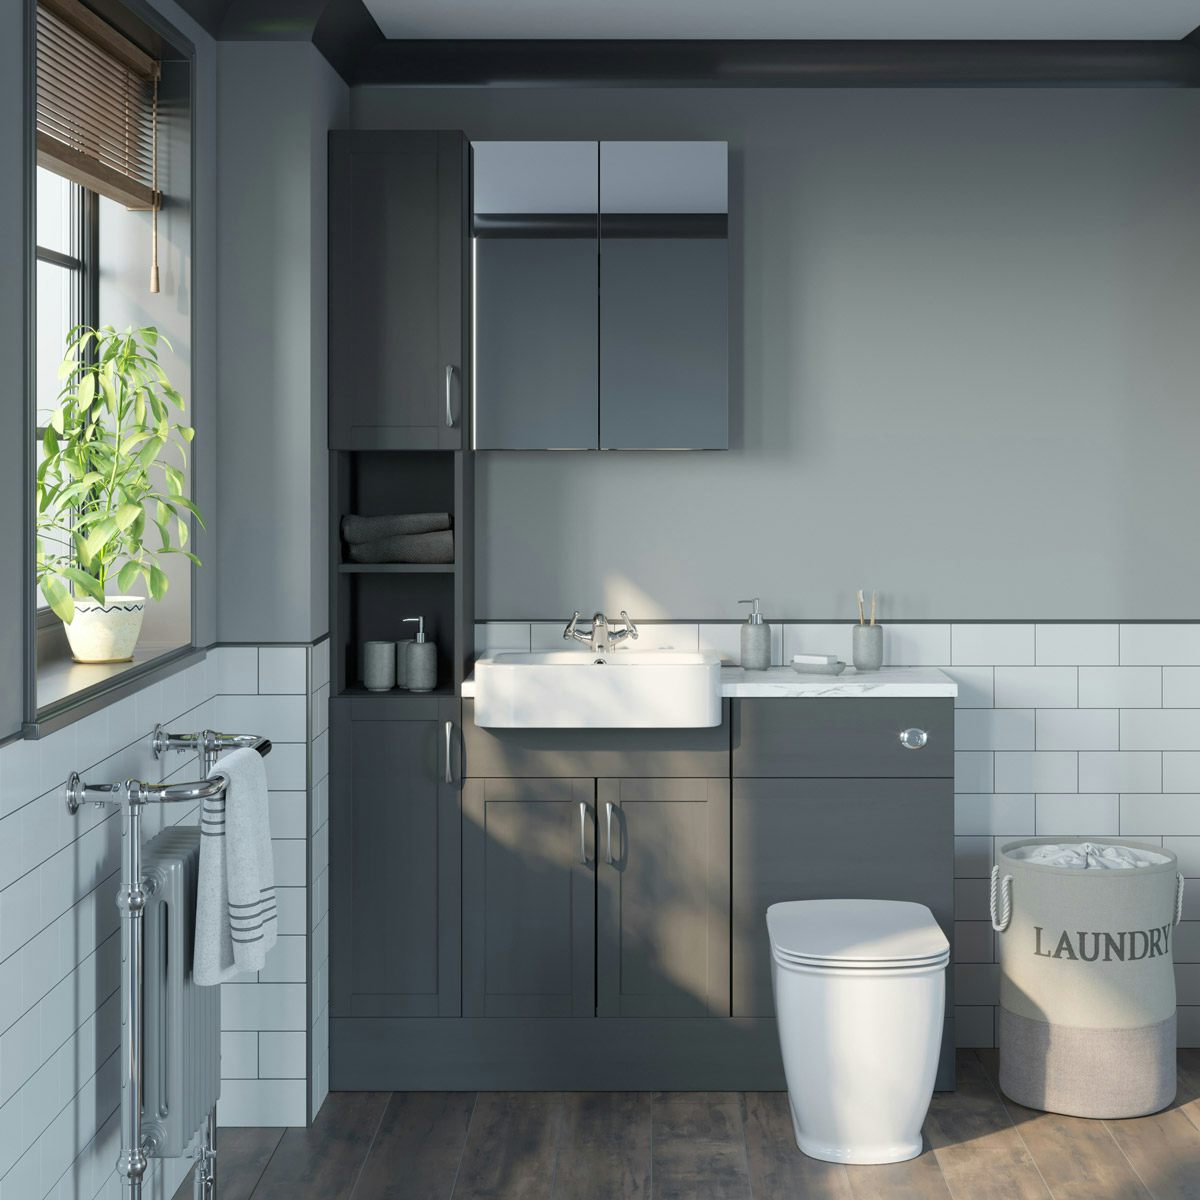 Reeves Newbury dusk grey tall fitted furniture & mirror combination with white marble worktop